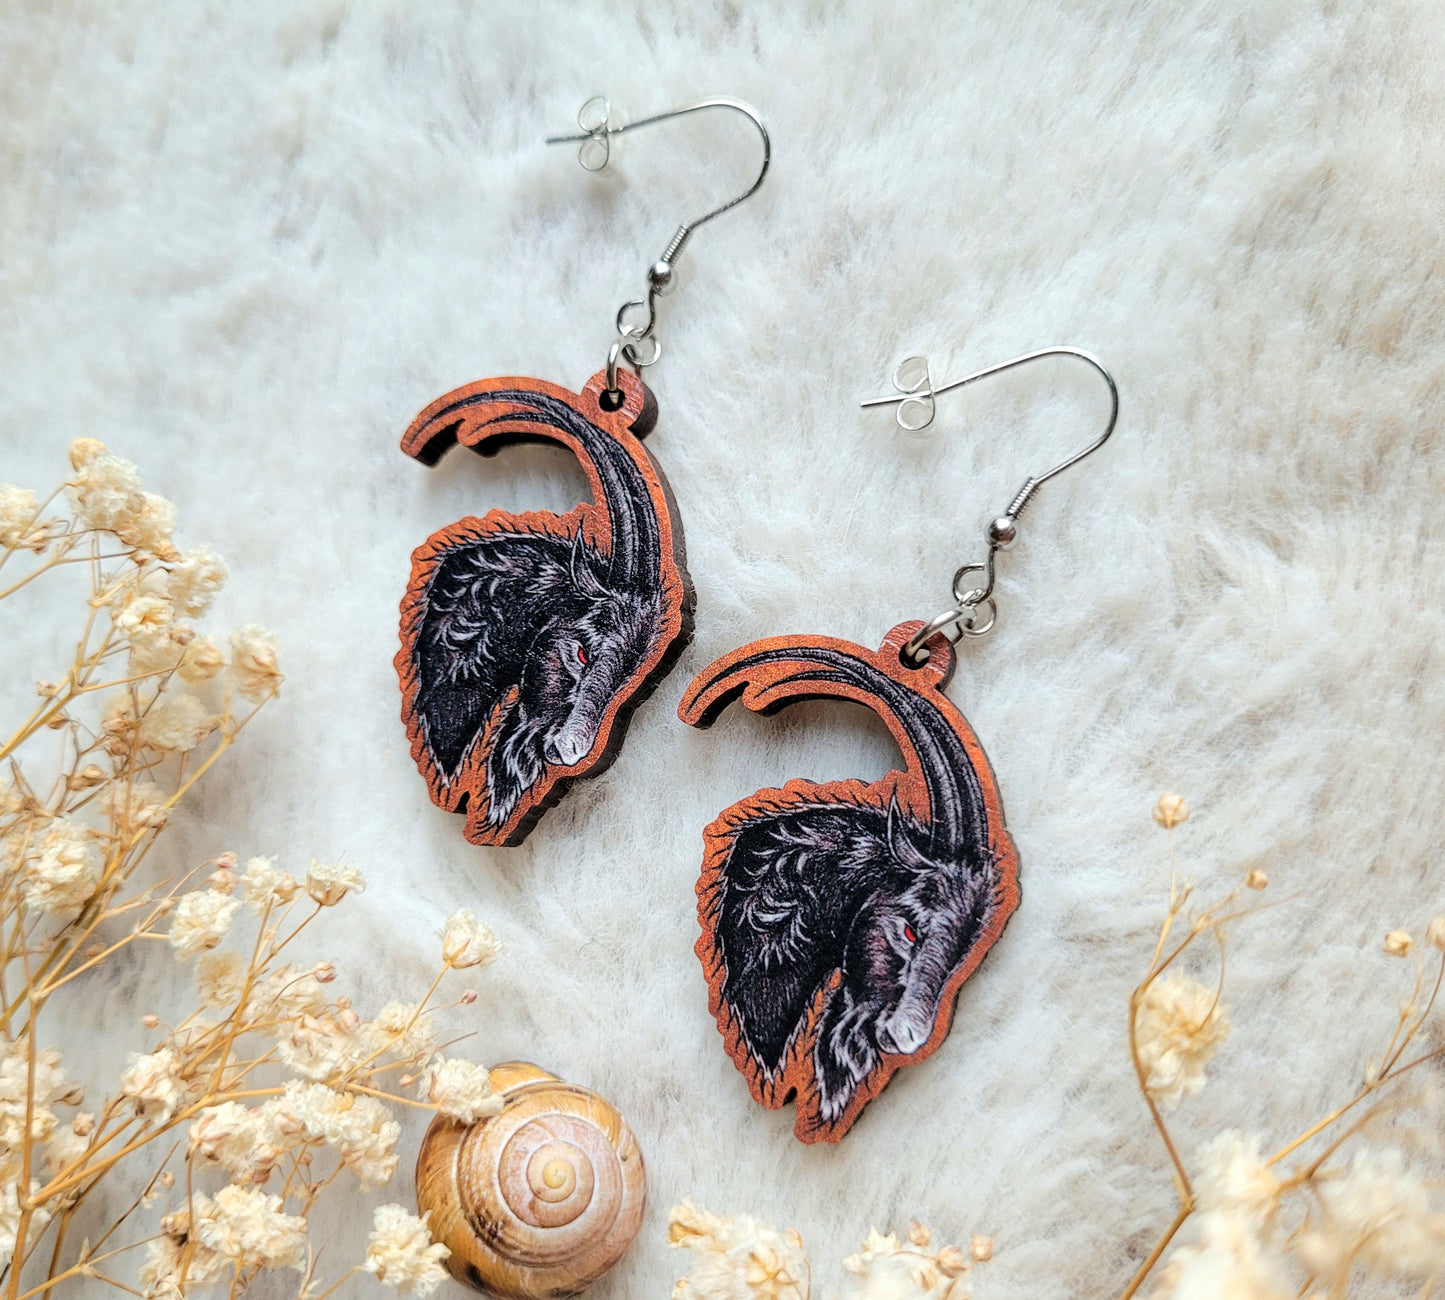 Black Phillip Goat illustrated earrings, responsibly sourced cherry wood, 304 Stainless Steel hooks, by Grace Moth